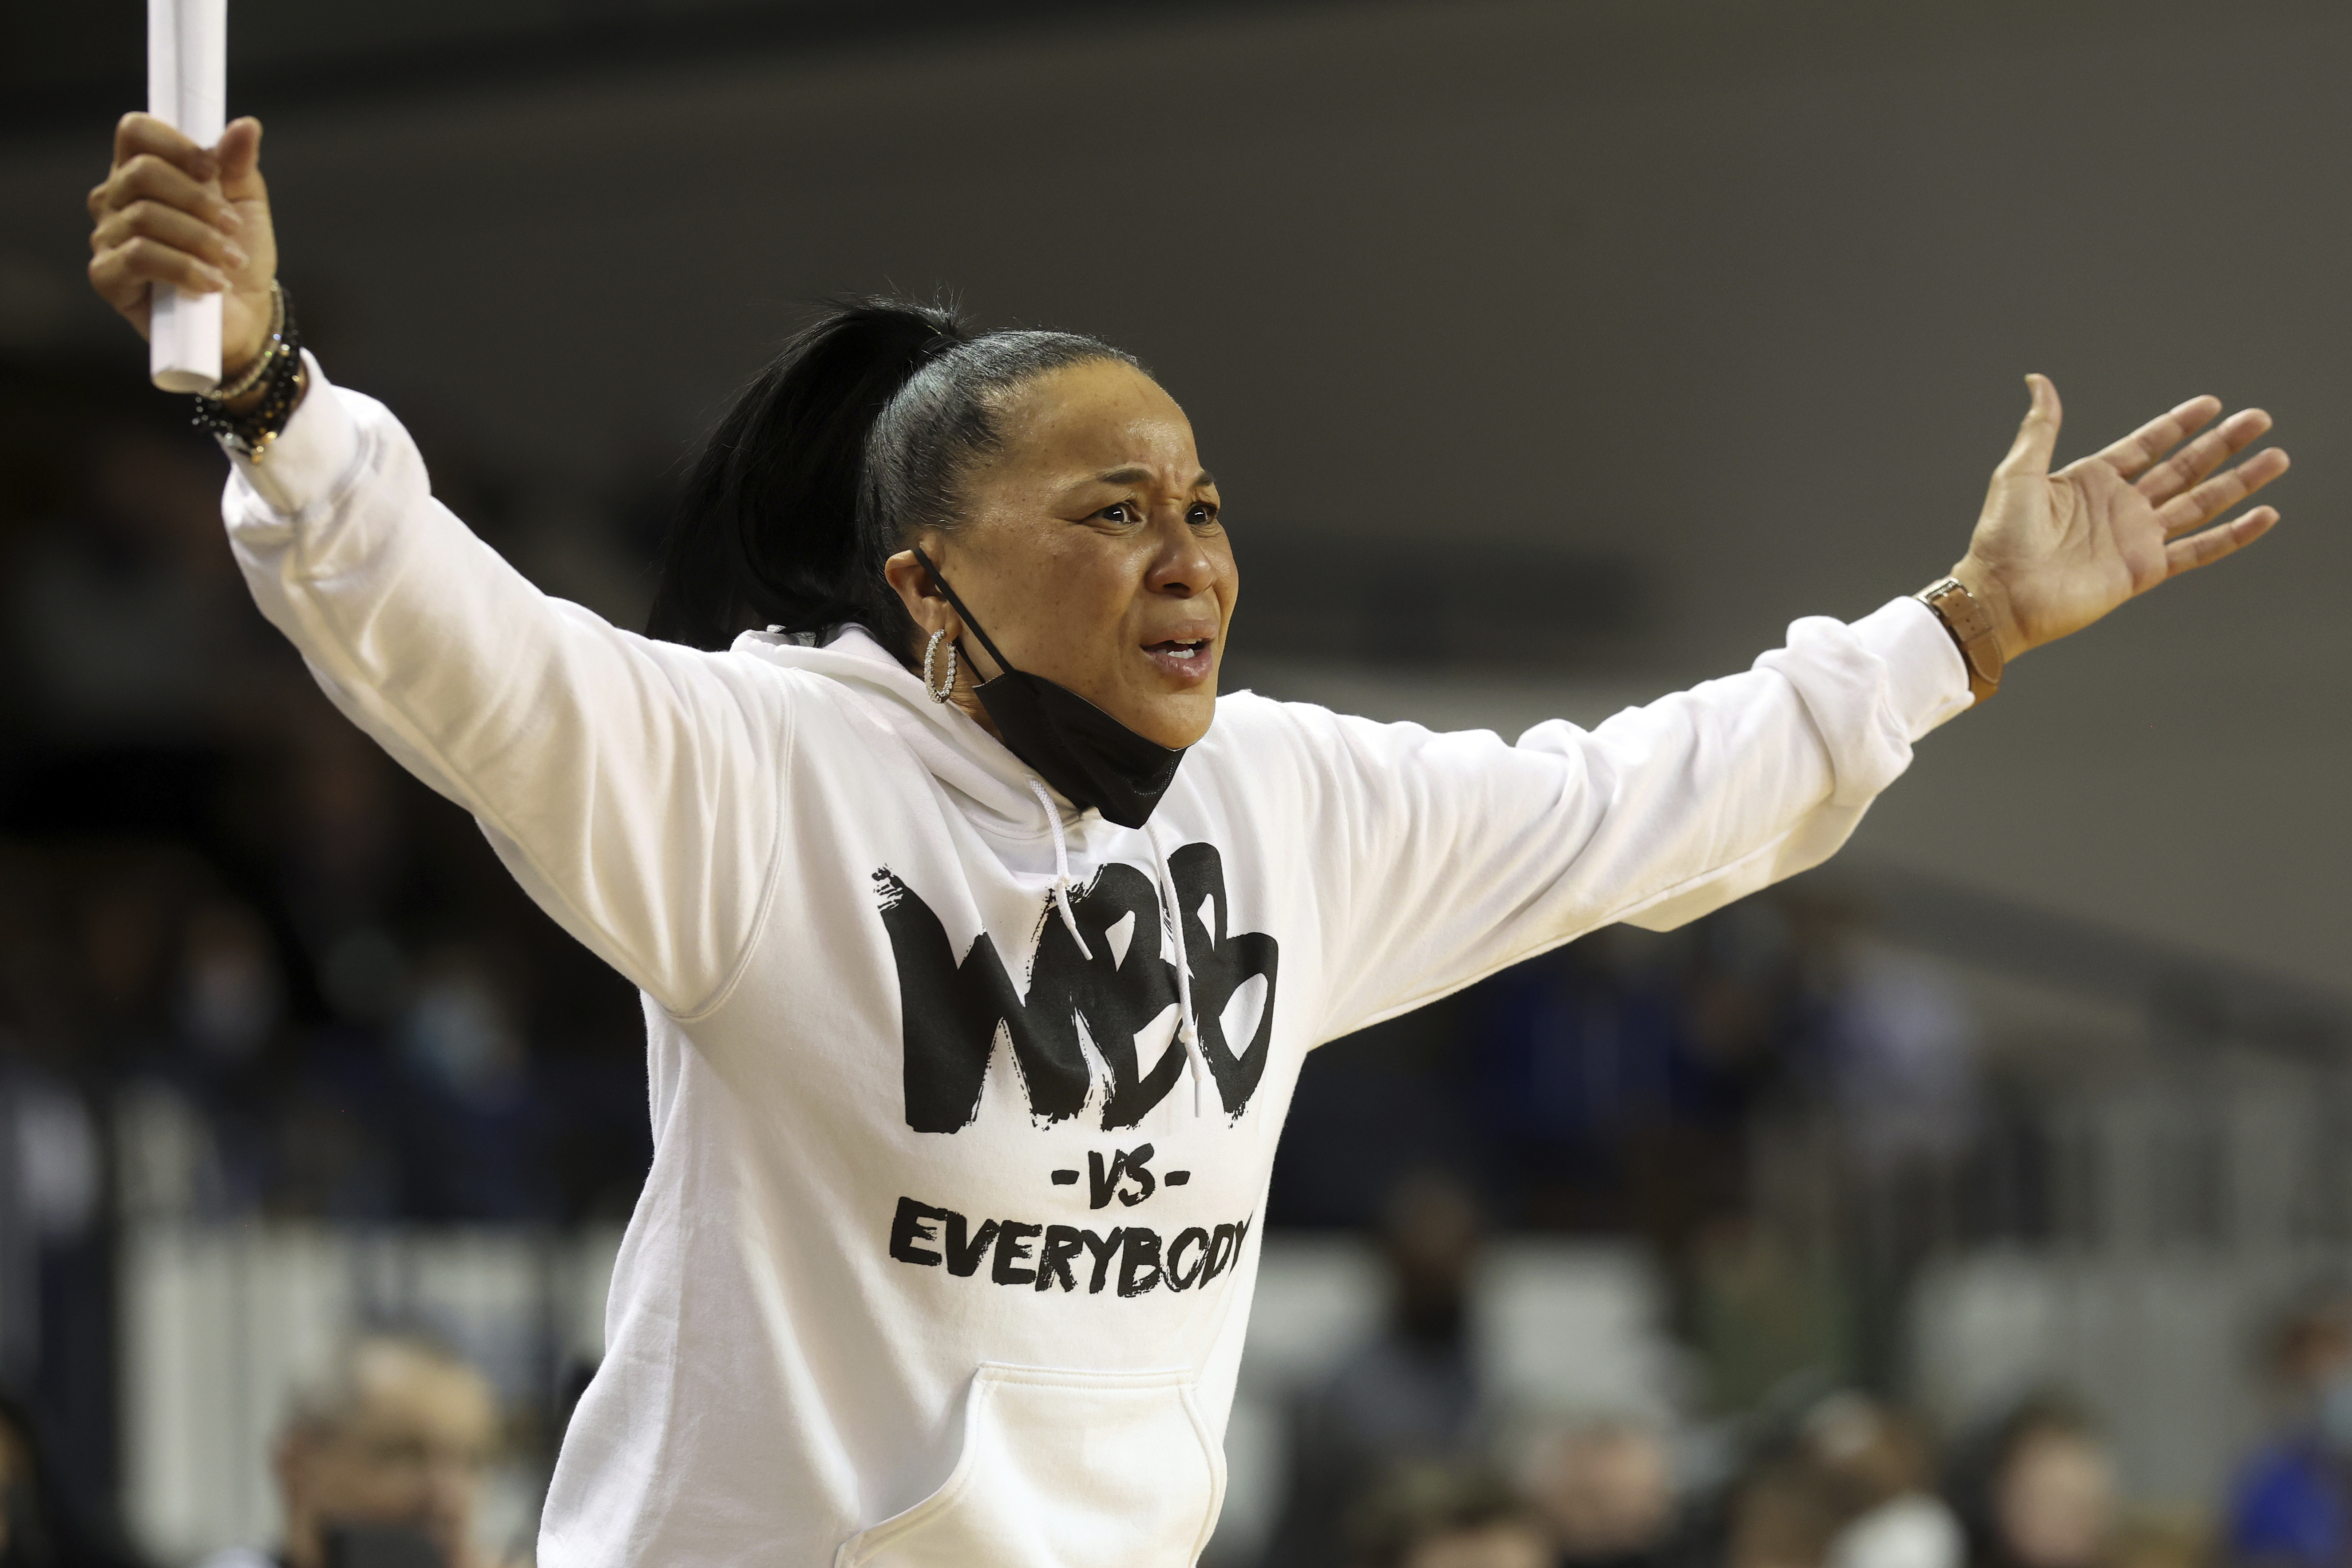 Dawn Staley is ALL IN ON THE @philadelphiaeagles 🏈🦅 (Via secnetwork/